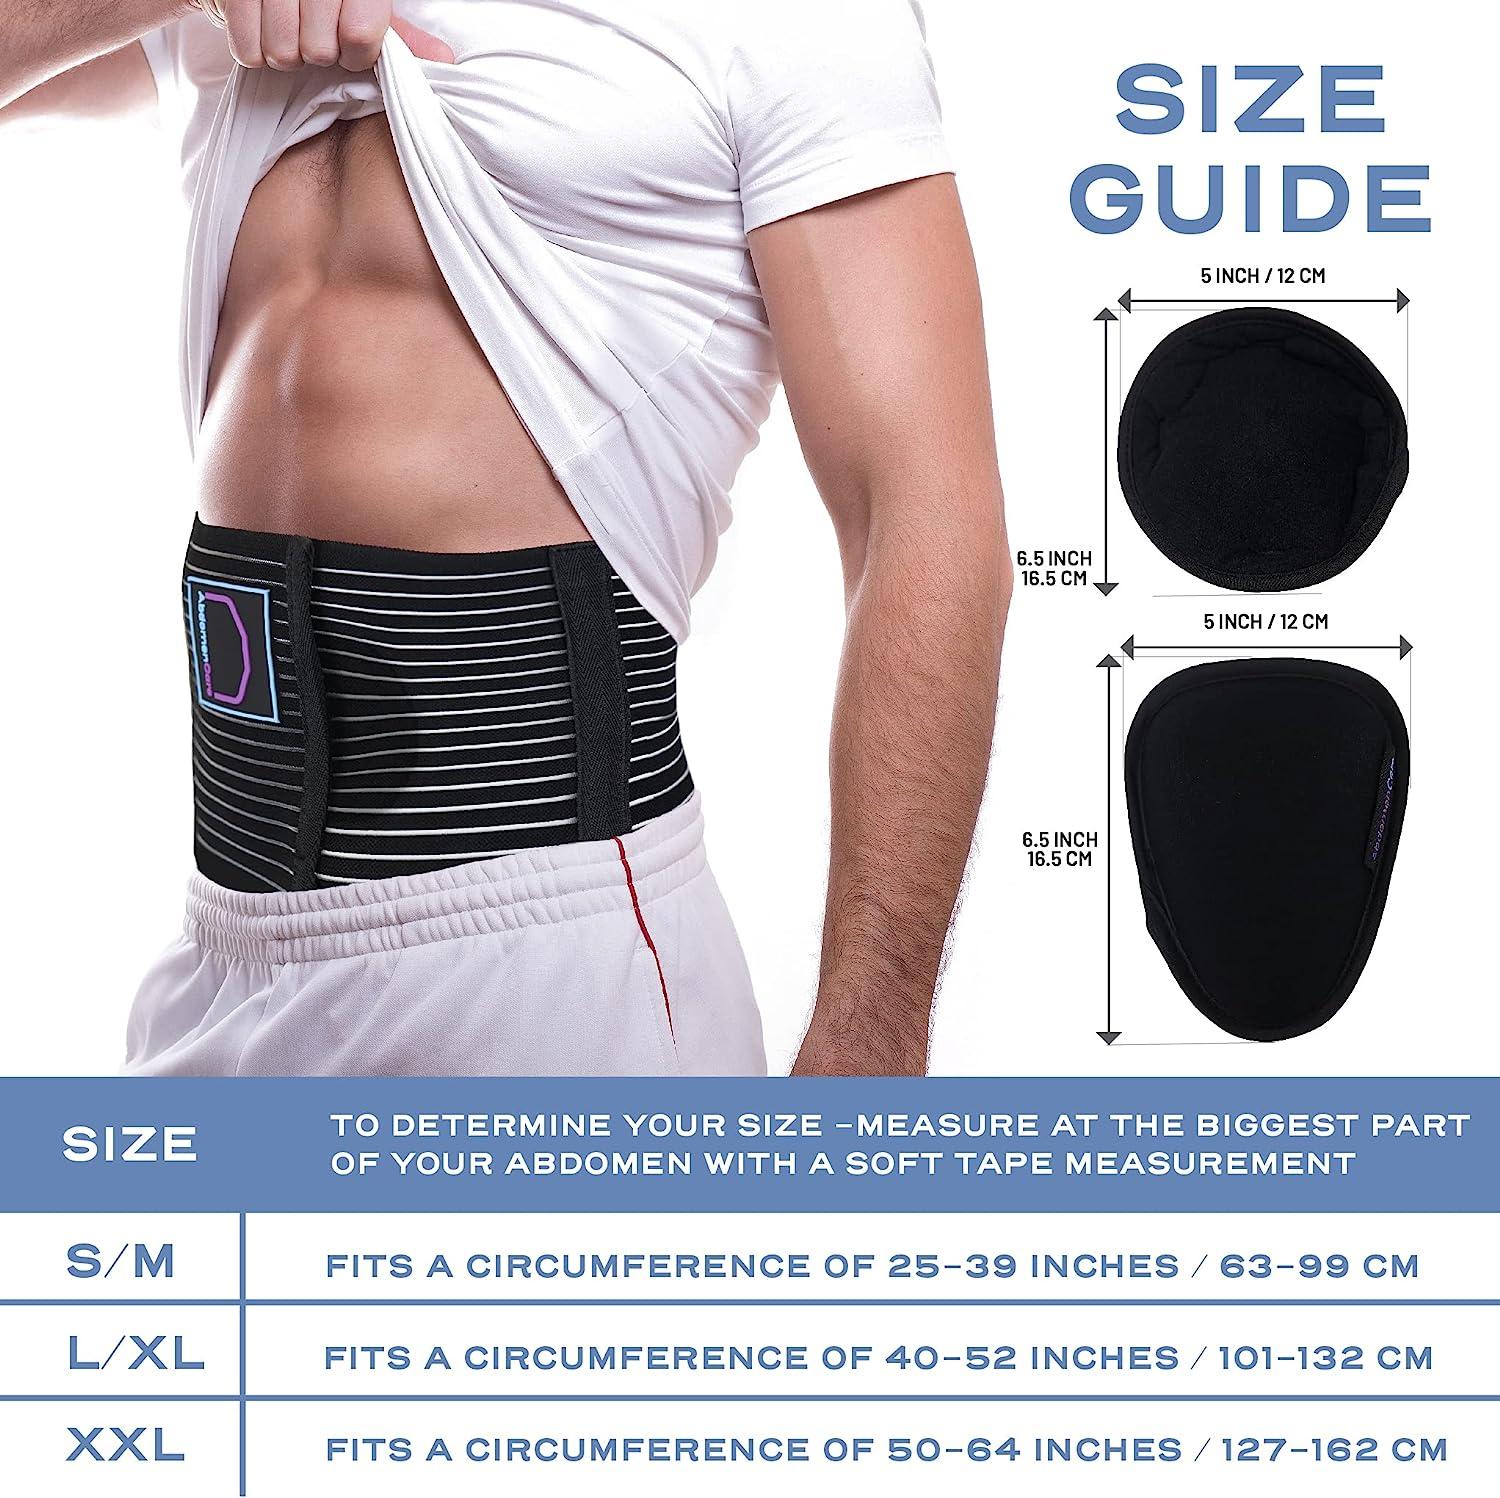 Belltop - Umbilical hernia belt for women and men - Hernia support for men  with compression pad (inguinal, ventral, belly button) - Abdominal binder  for hernia post surgery and postpartum (S/M) 